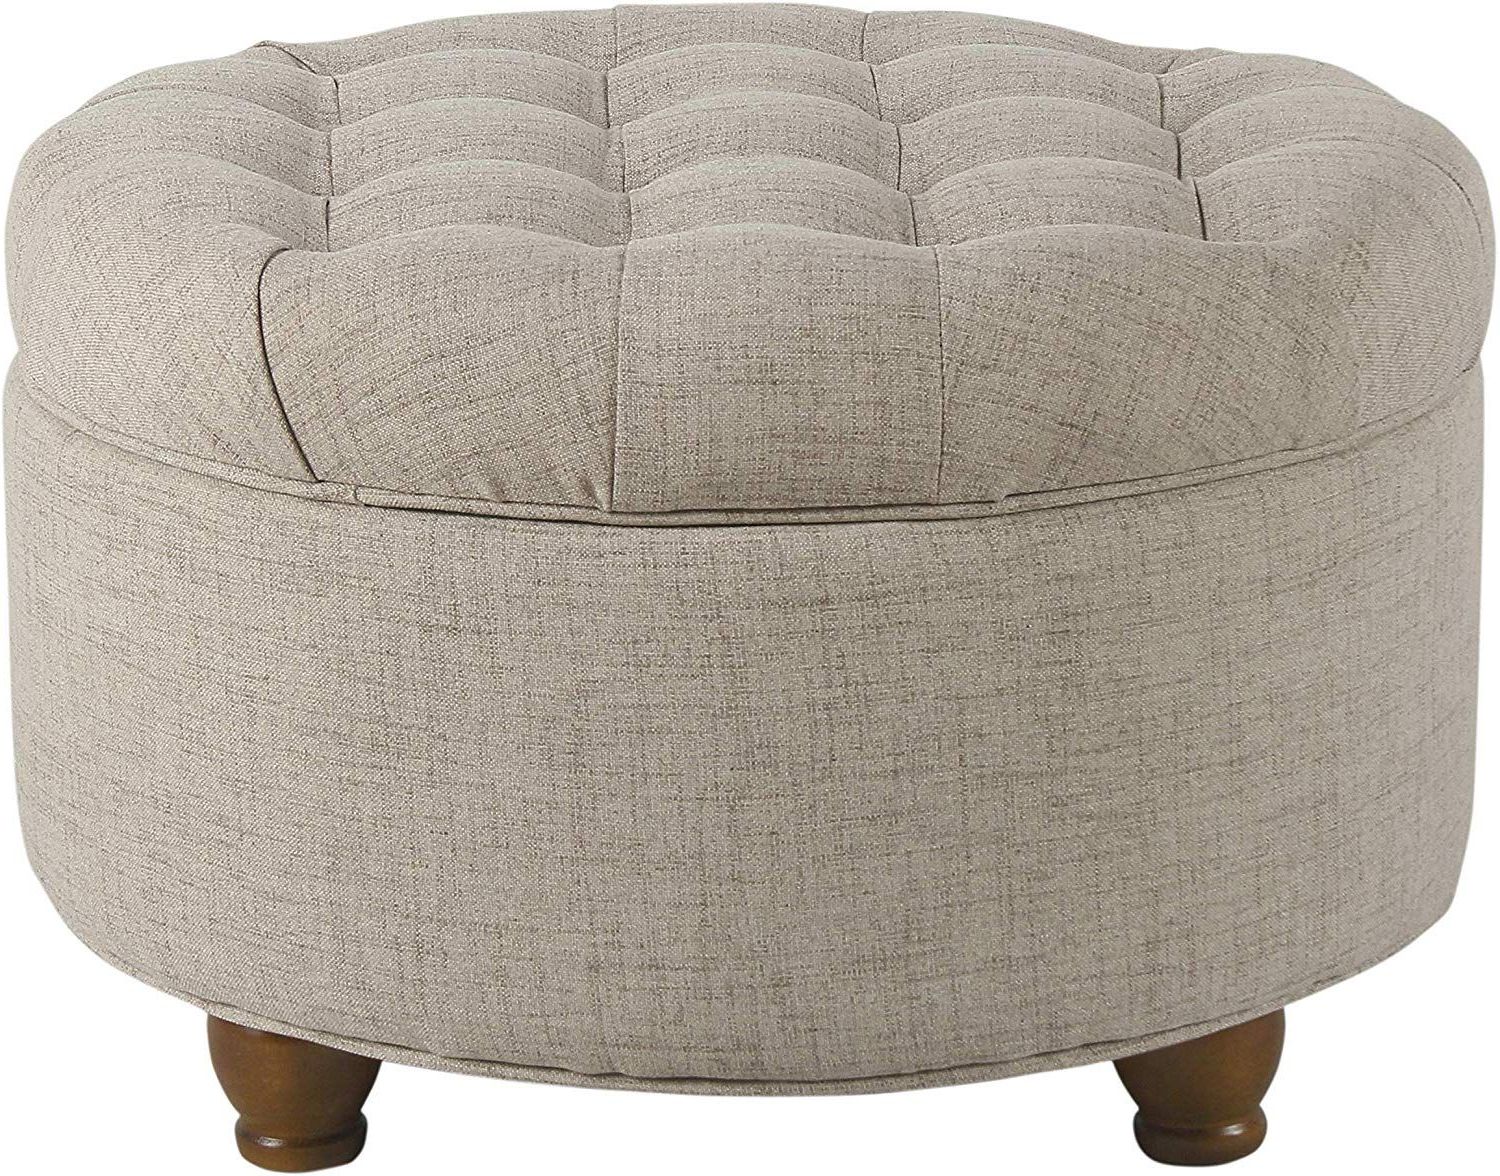 Well Known Cream Linen And Fir Wood Round Ottomans For Amazonsmile: Homepop Large Button Tufted Round Storage Ottoman, Tan And (View 4 of 10)